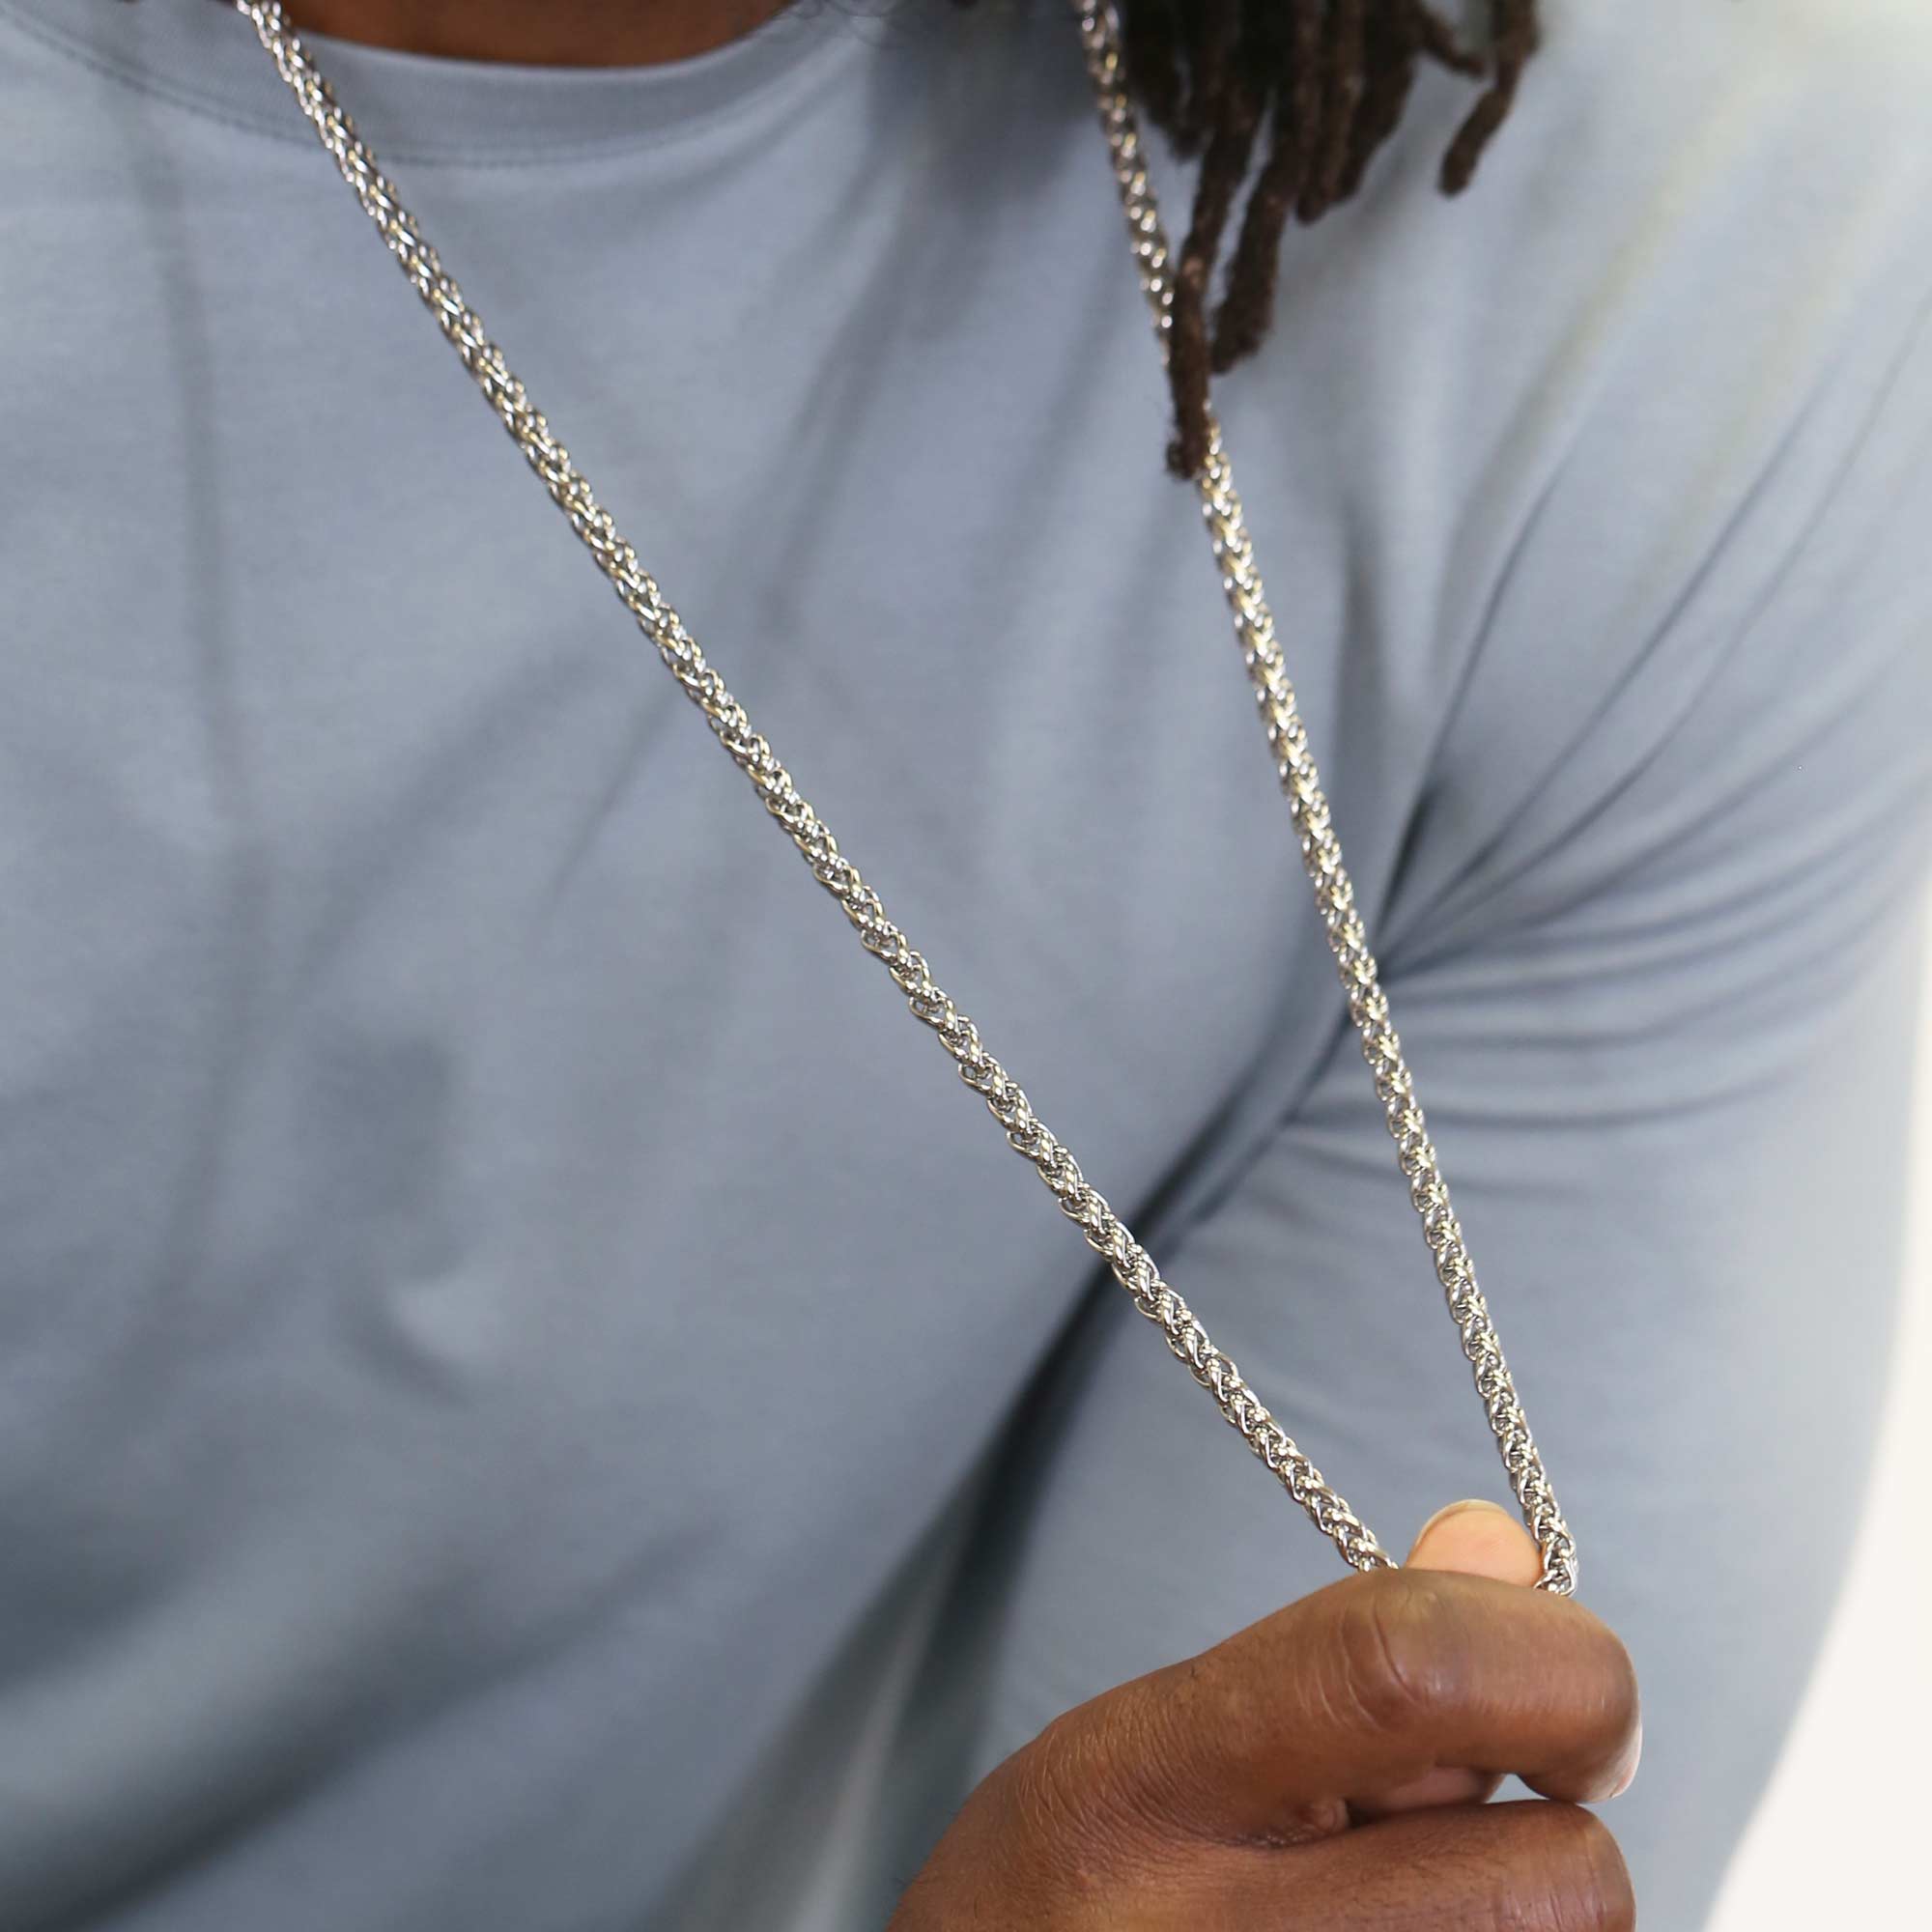 Rover Stainless Steel Convertible Wheat Chain Necklace